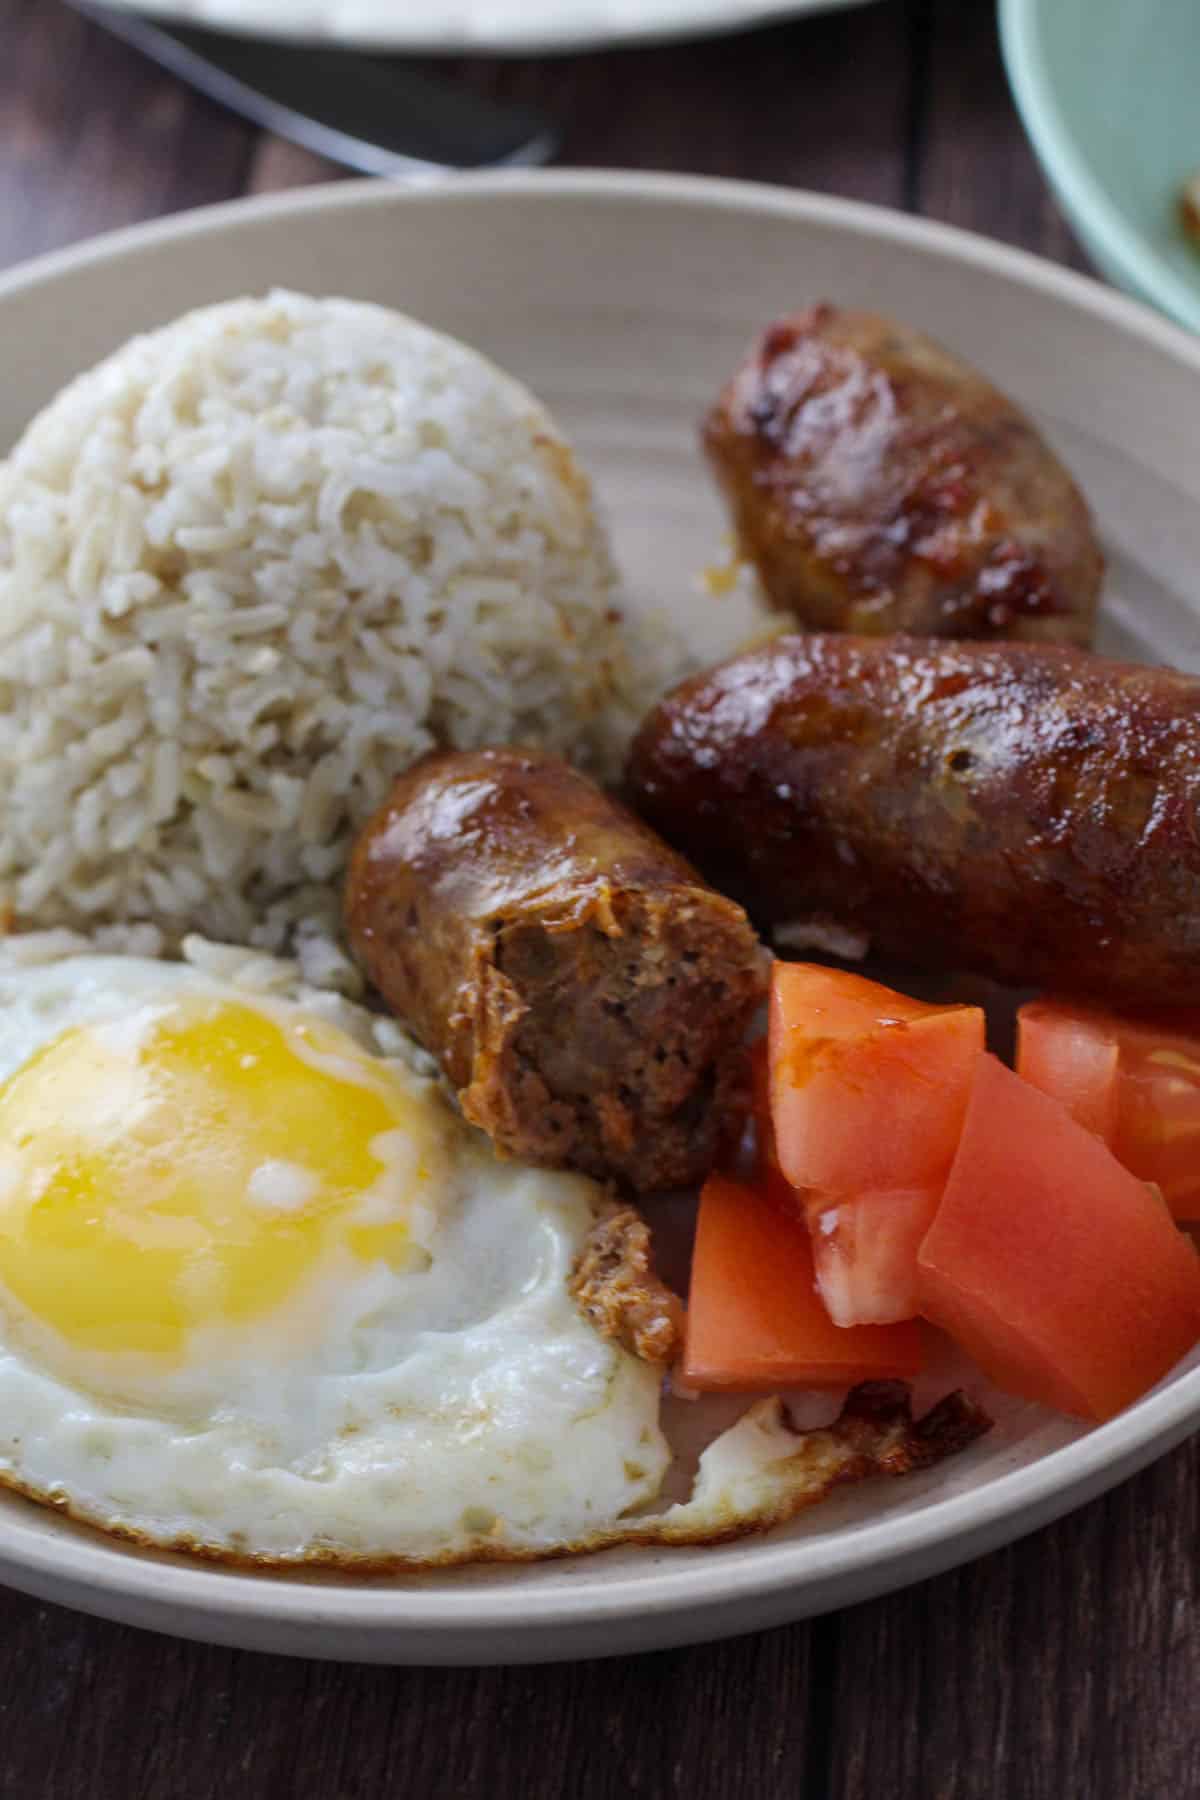 fried rice, fried egg, sliced tomatoes, and longganisa on a plate.